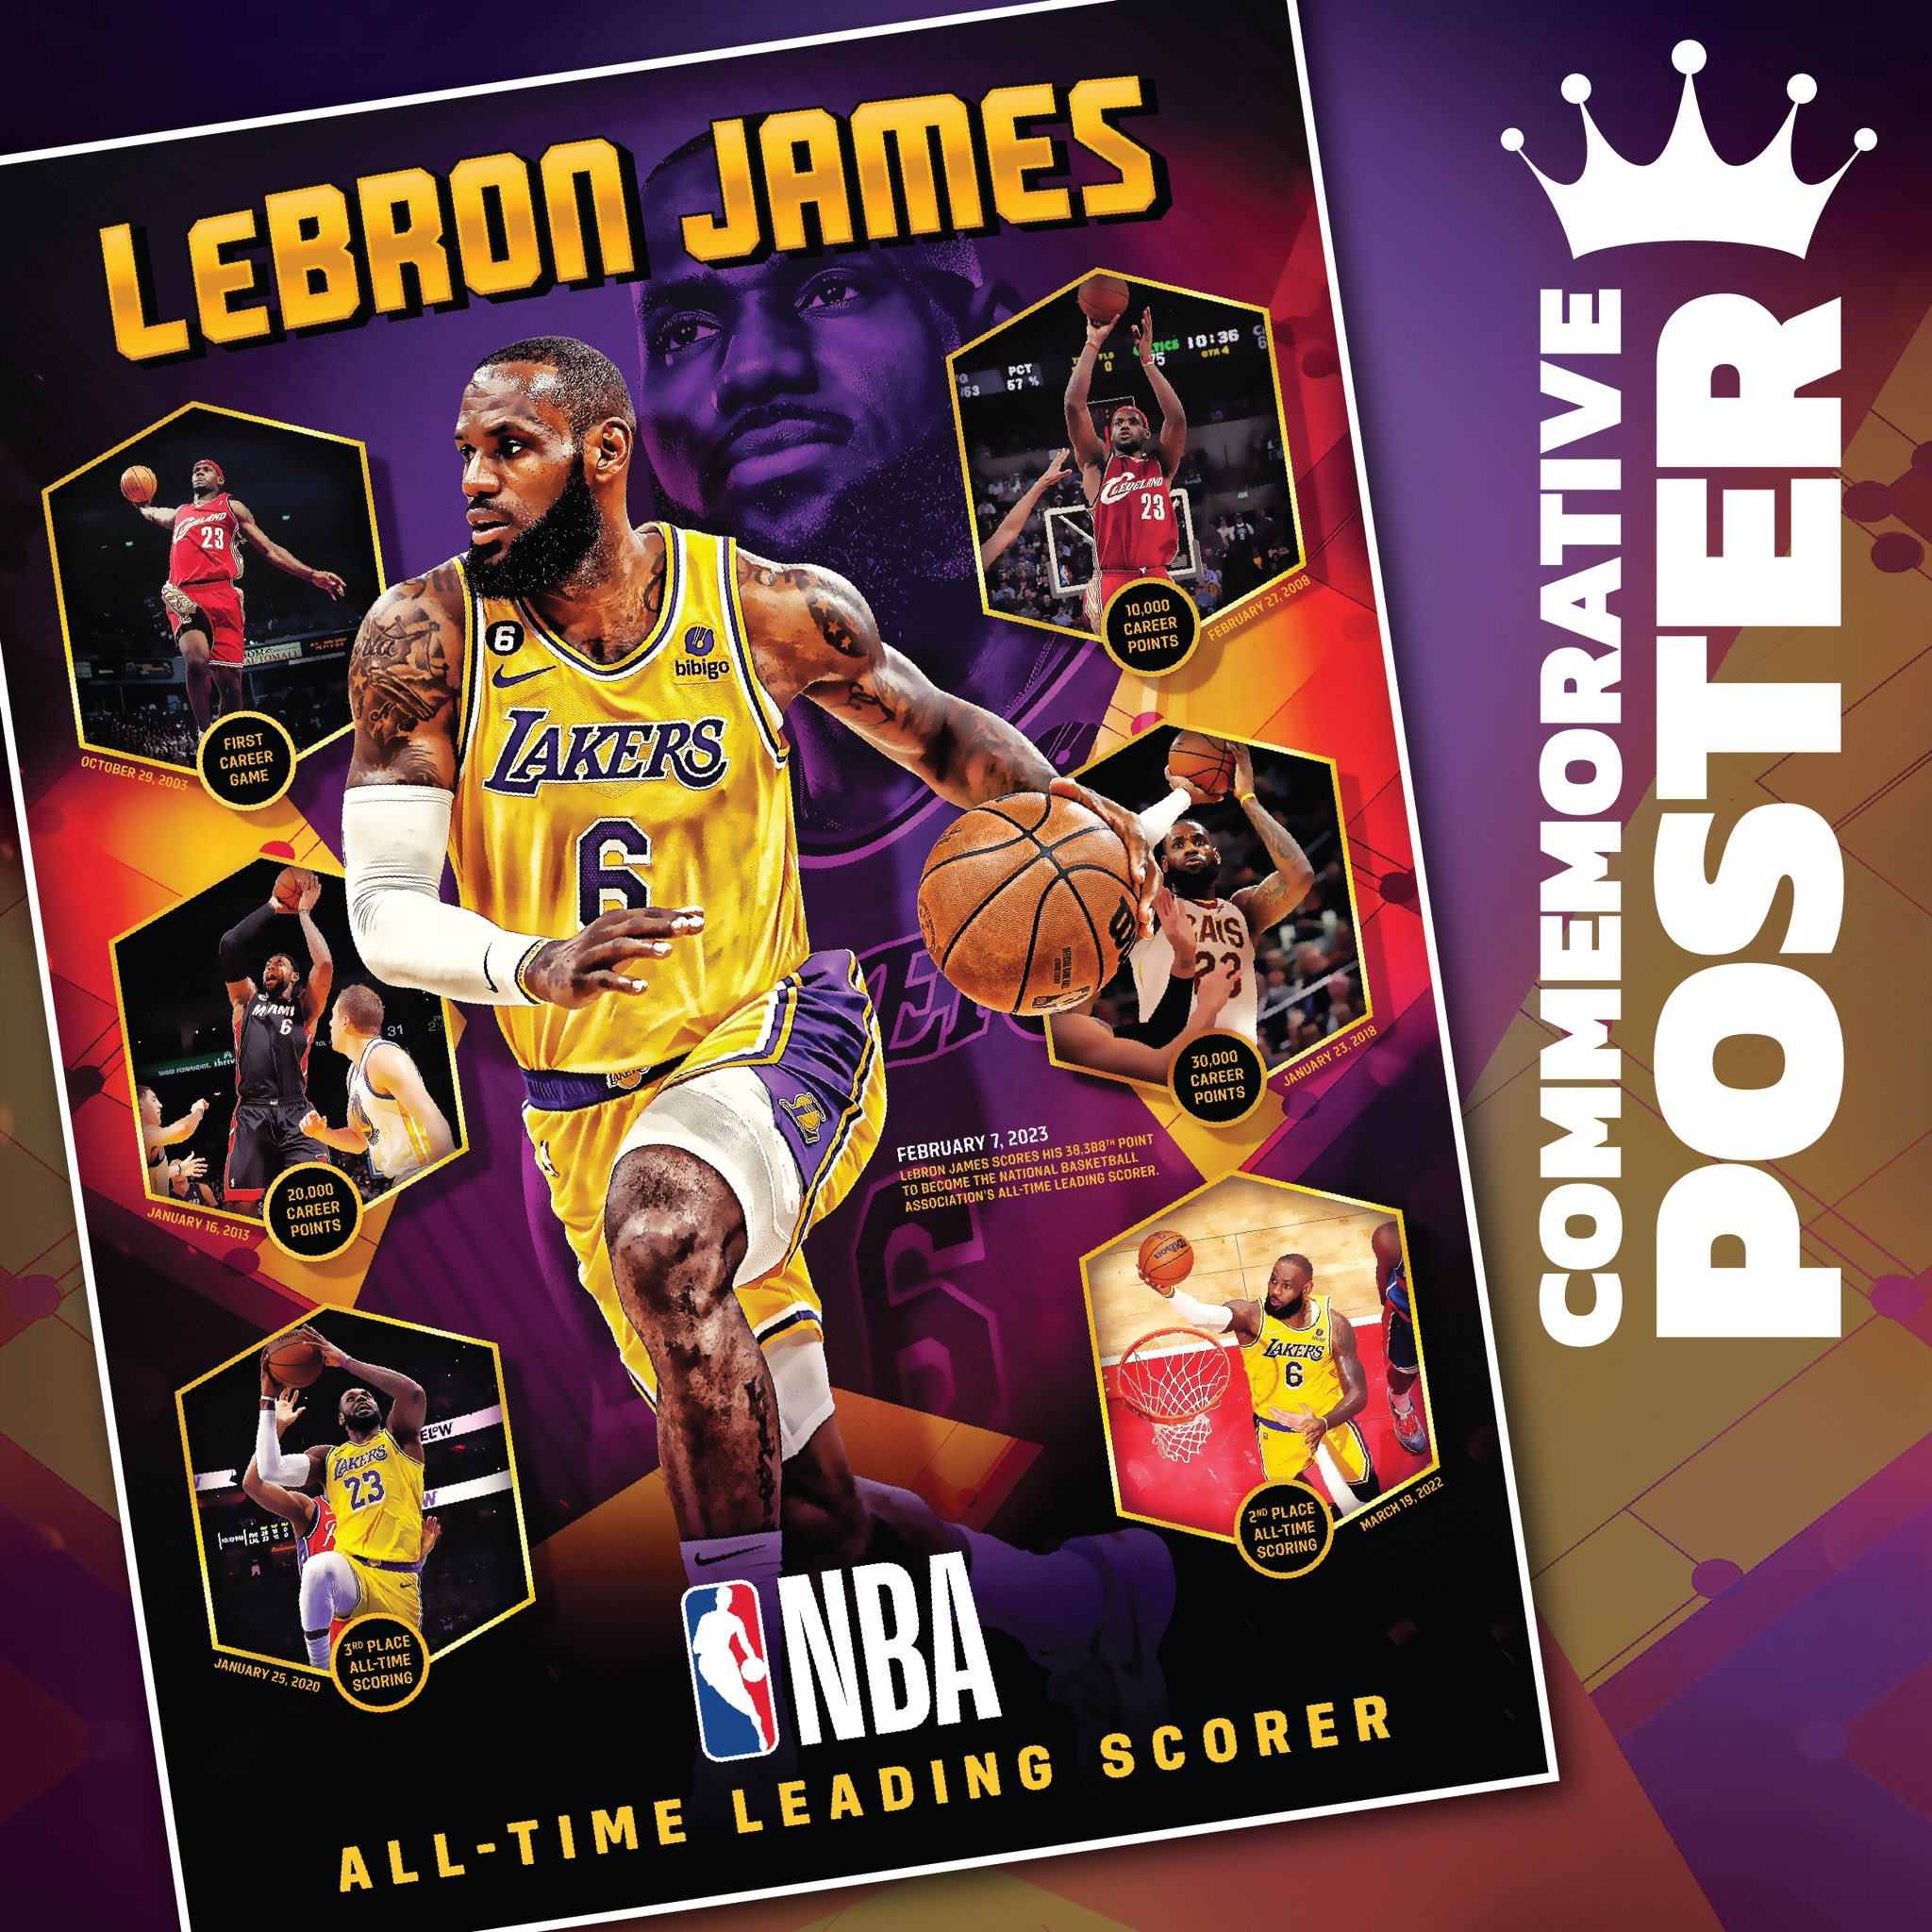 Basketball: NBA-'King James' claims throne as all-time leading scorer